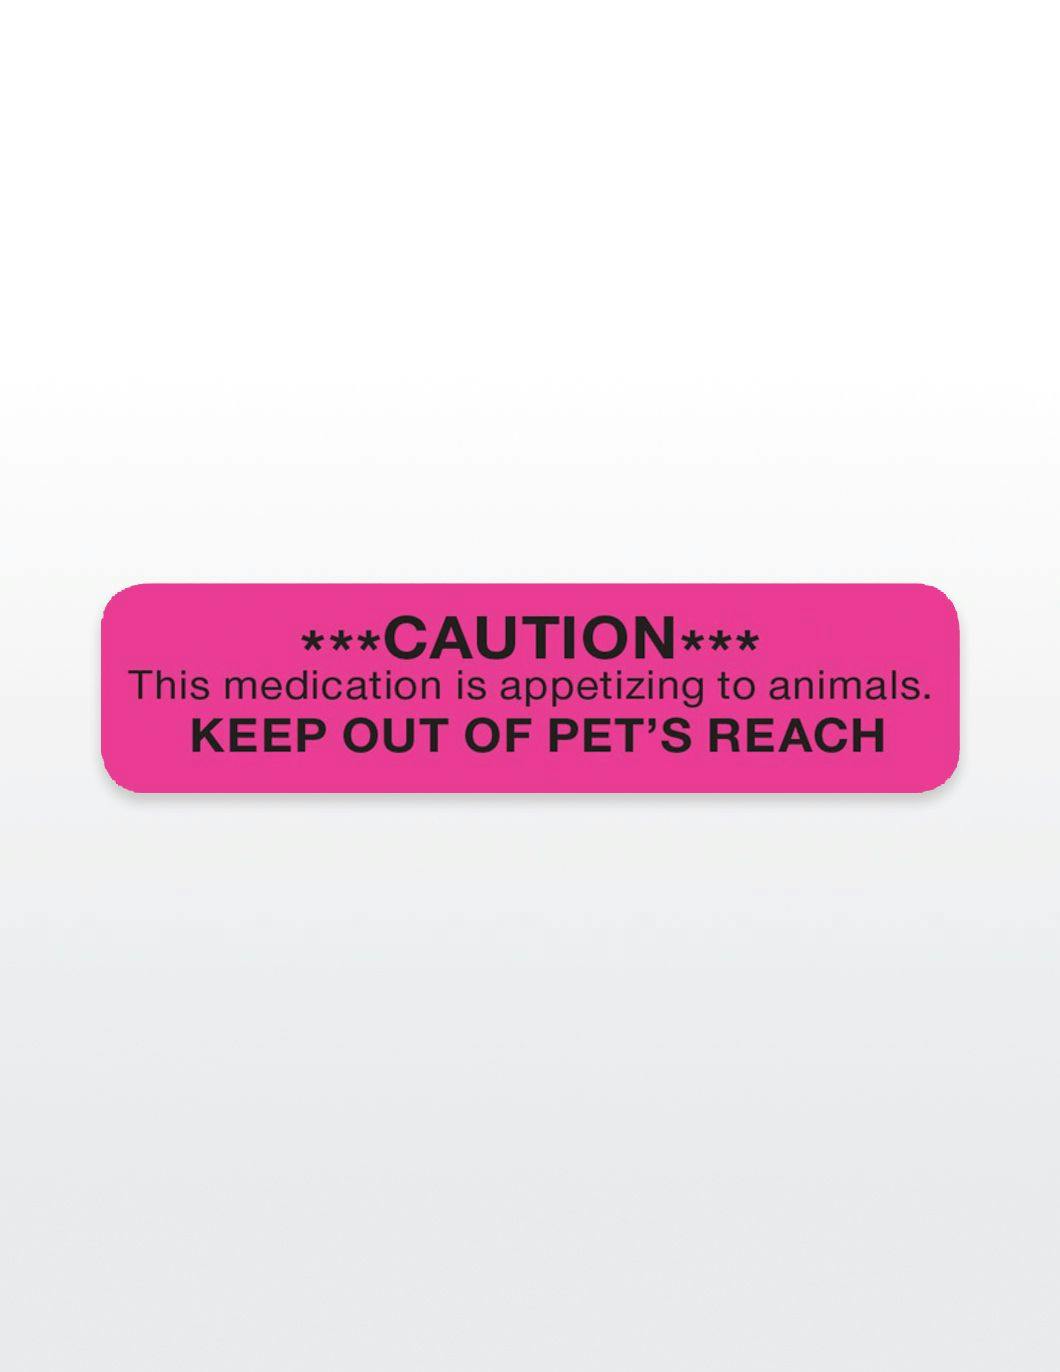 caution-appetizing-to-animals-medication-stickers